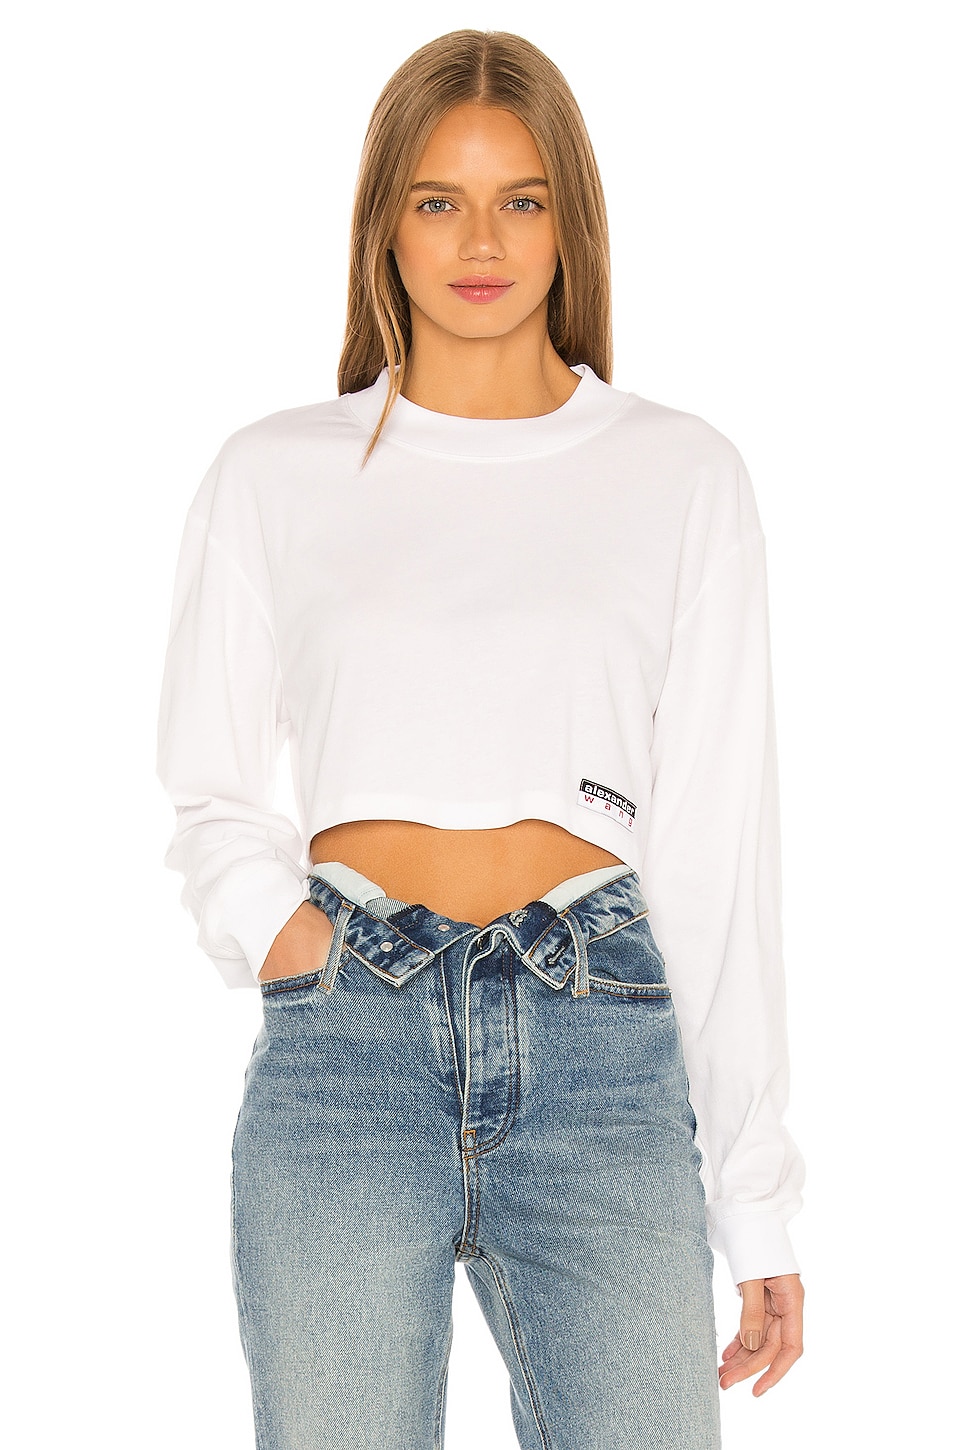 Alexander Wang Wash & Go Cropped Top in White | REVOLVE